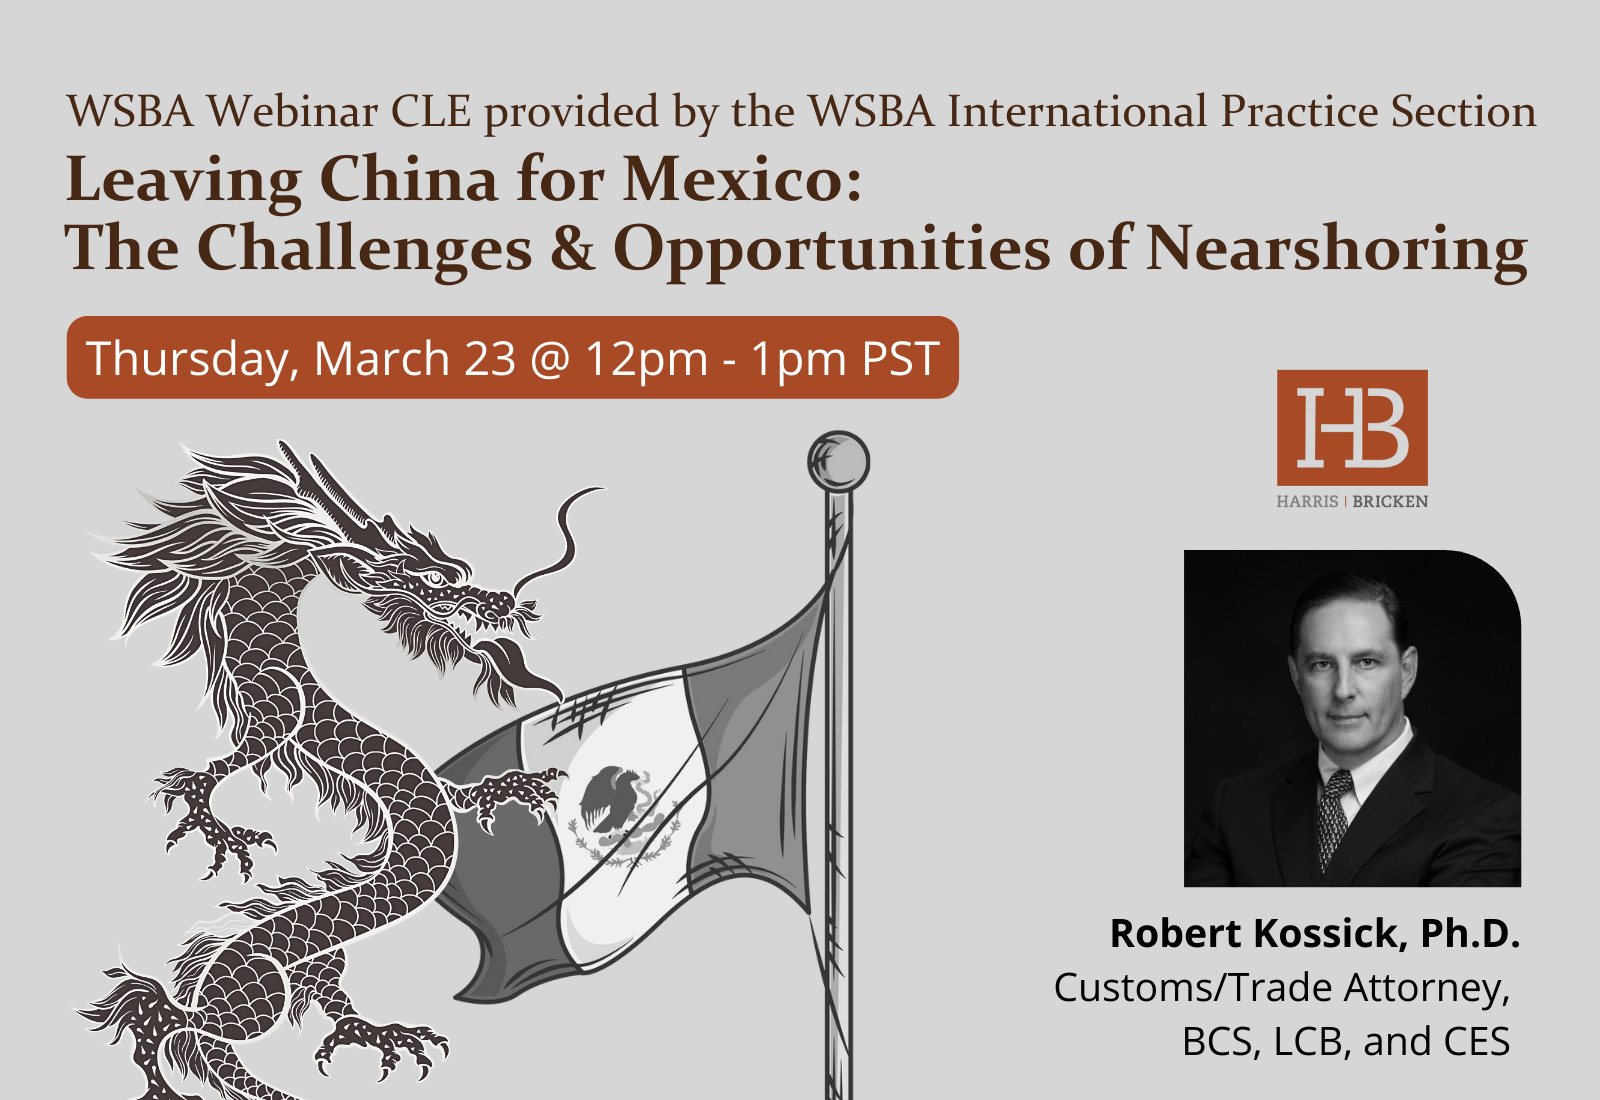 Leaving China for Mexico and The Challenges and Opportunities of Nearshoring: A March 23 Webinar